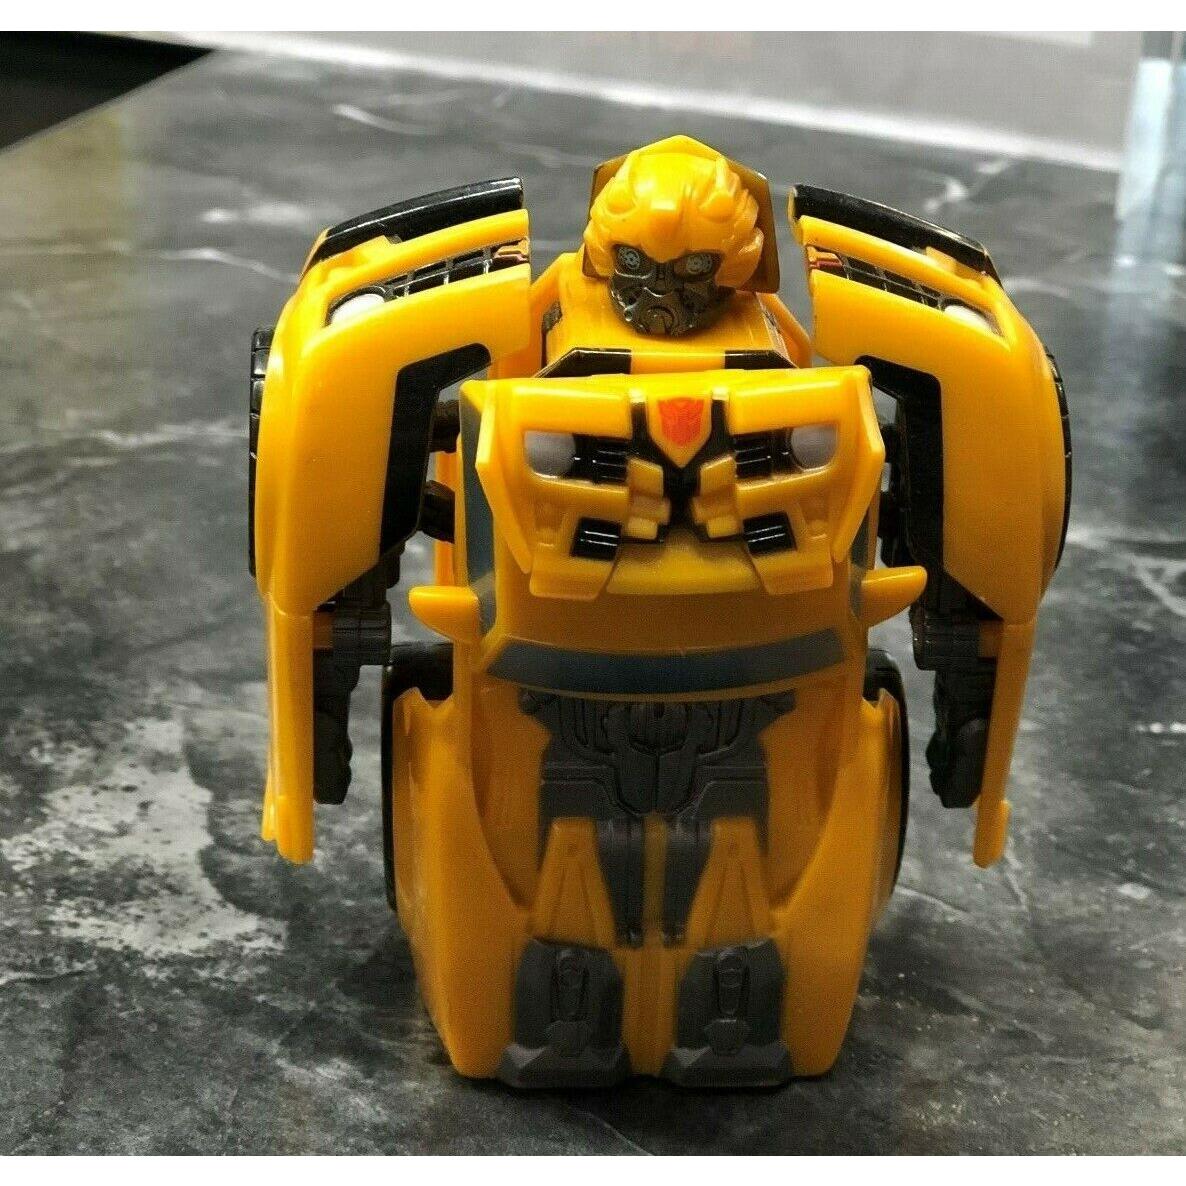 Hasbro C1525A 2008 4 1/2 Yellow Bumble Bee Transformers Gravity Bot Toy